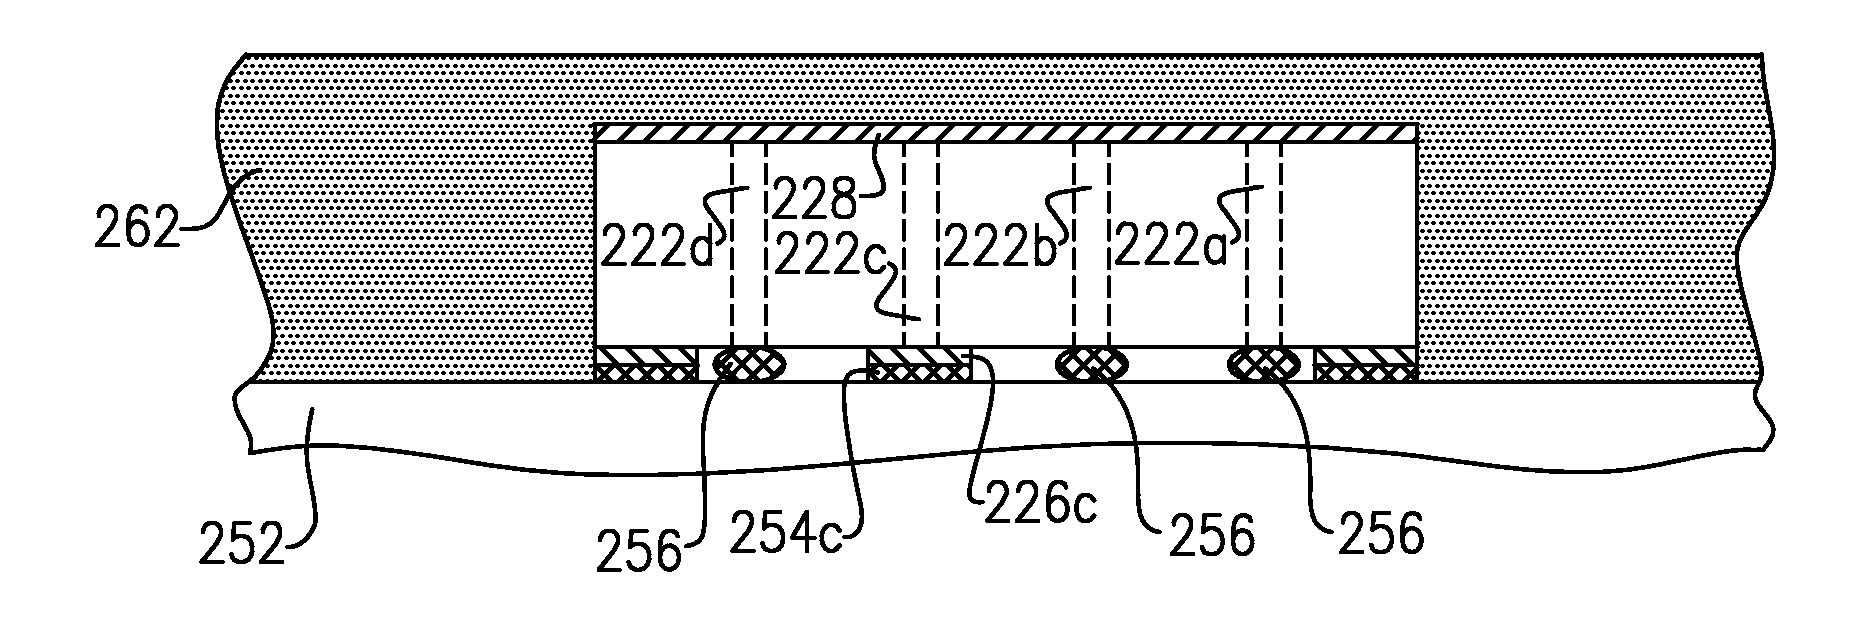 Apparatus and methods related to conformal coating implemented with surface mount devices